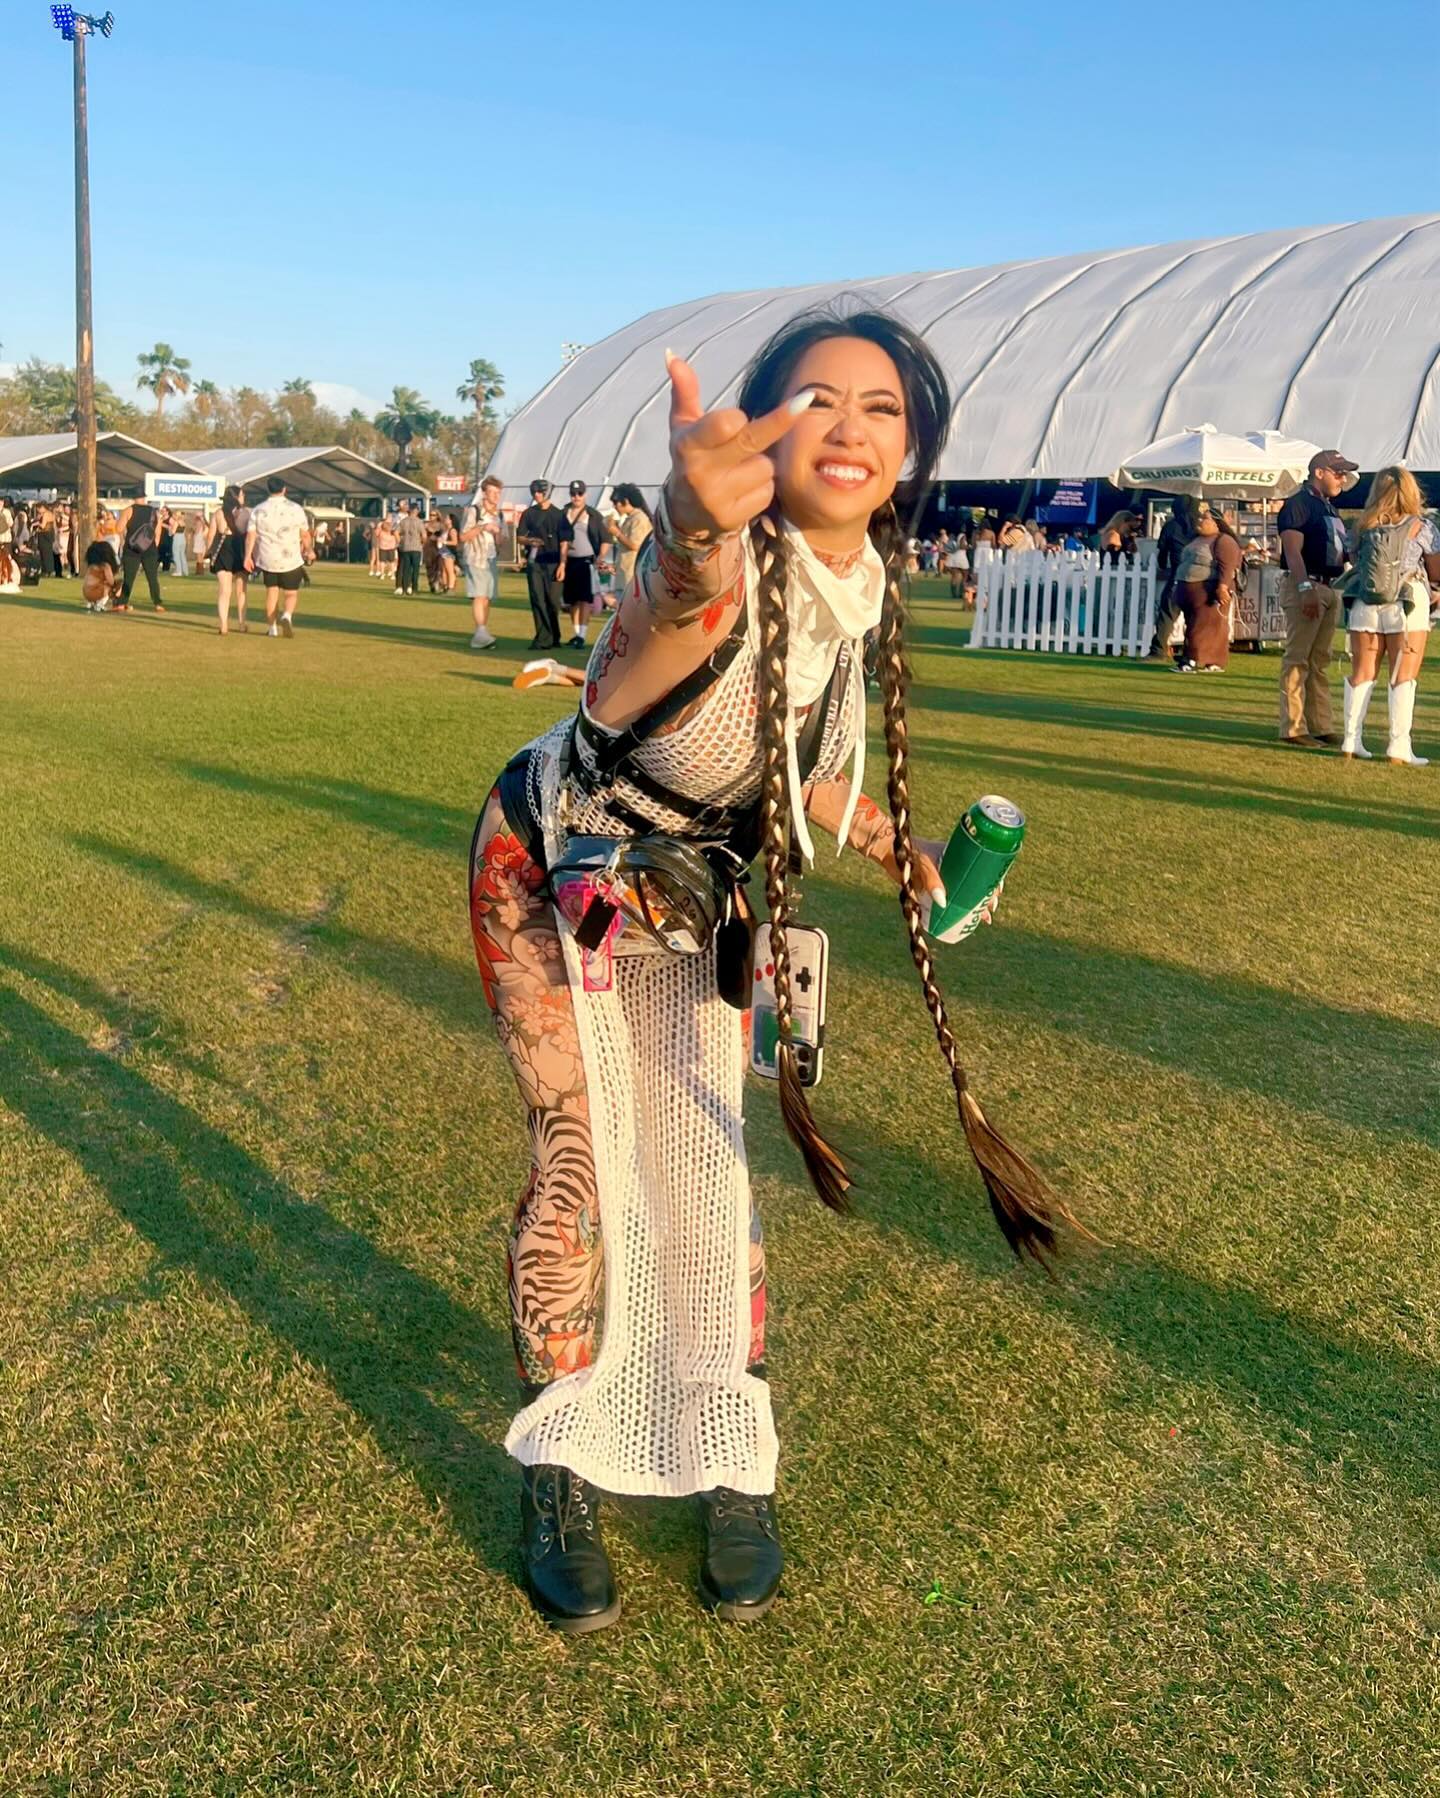 Already reminiscing about my 1st Coachella: the perfect medley of chaos, nostalgia, figuring out how to wash my ass, glizzys, & good vibes. Gratitude to all who made this an unforgettable experience. ✨

TY for the outfits, bestie!
More photos otw 🙌🏼